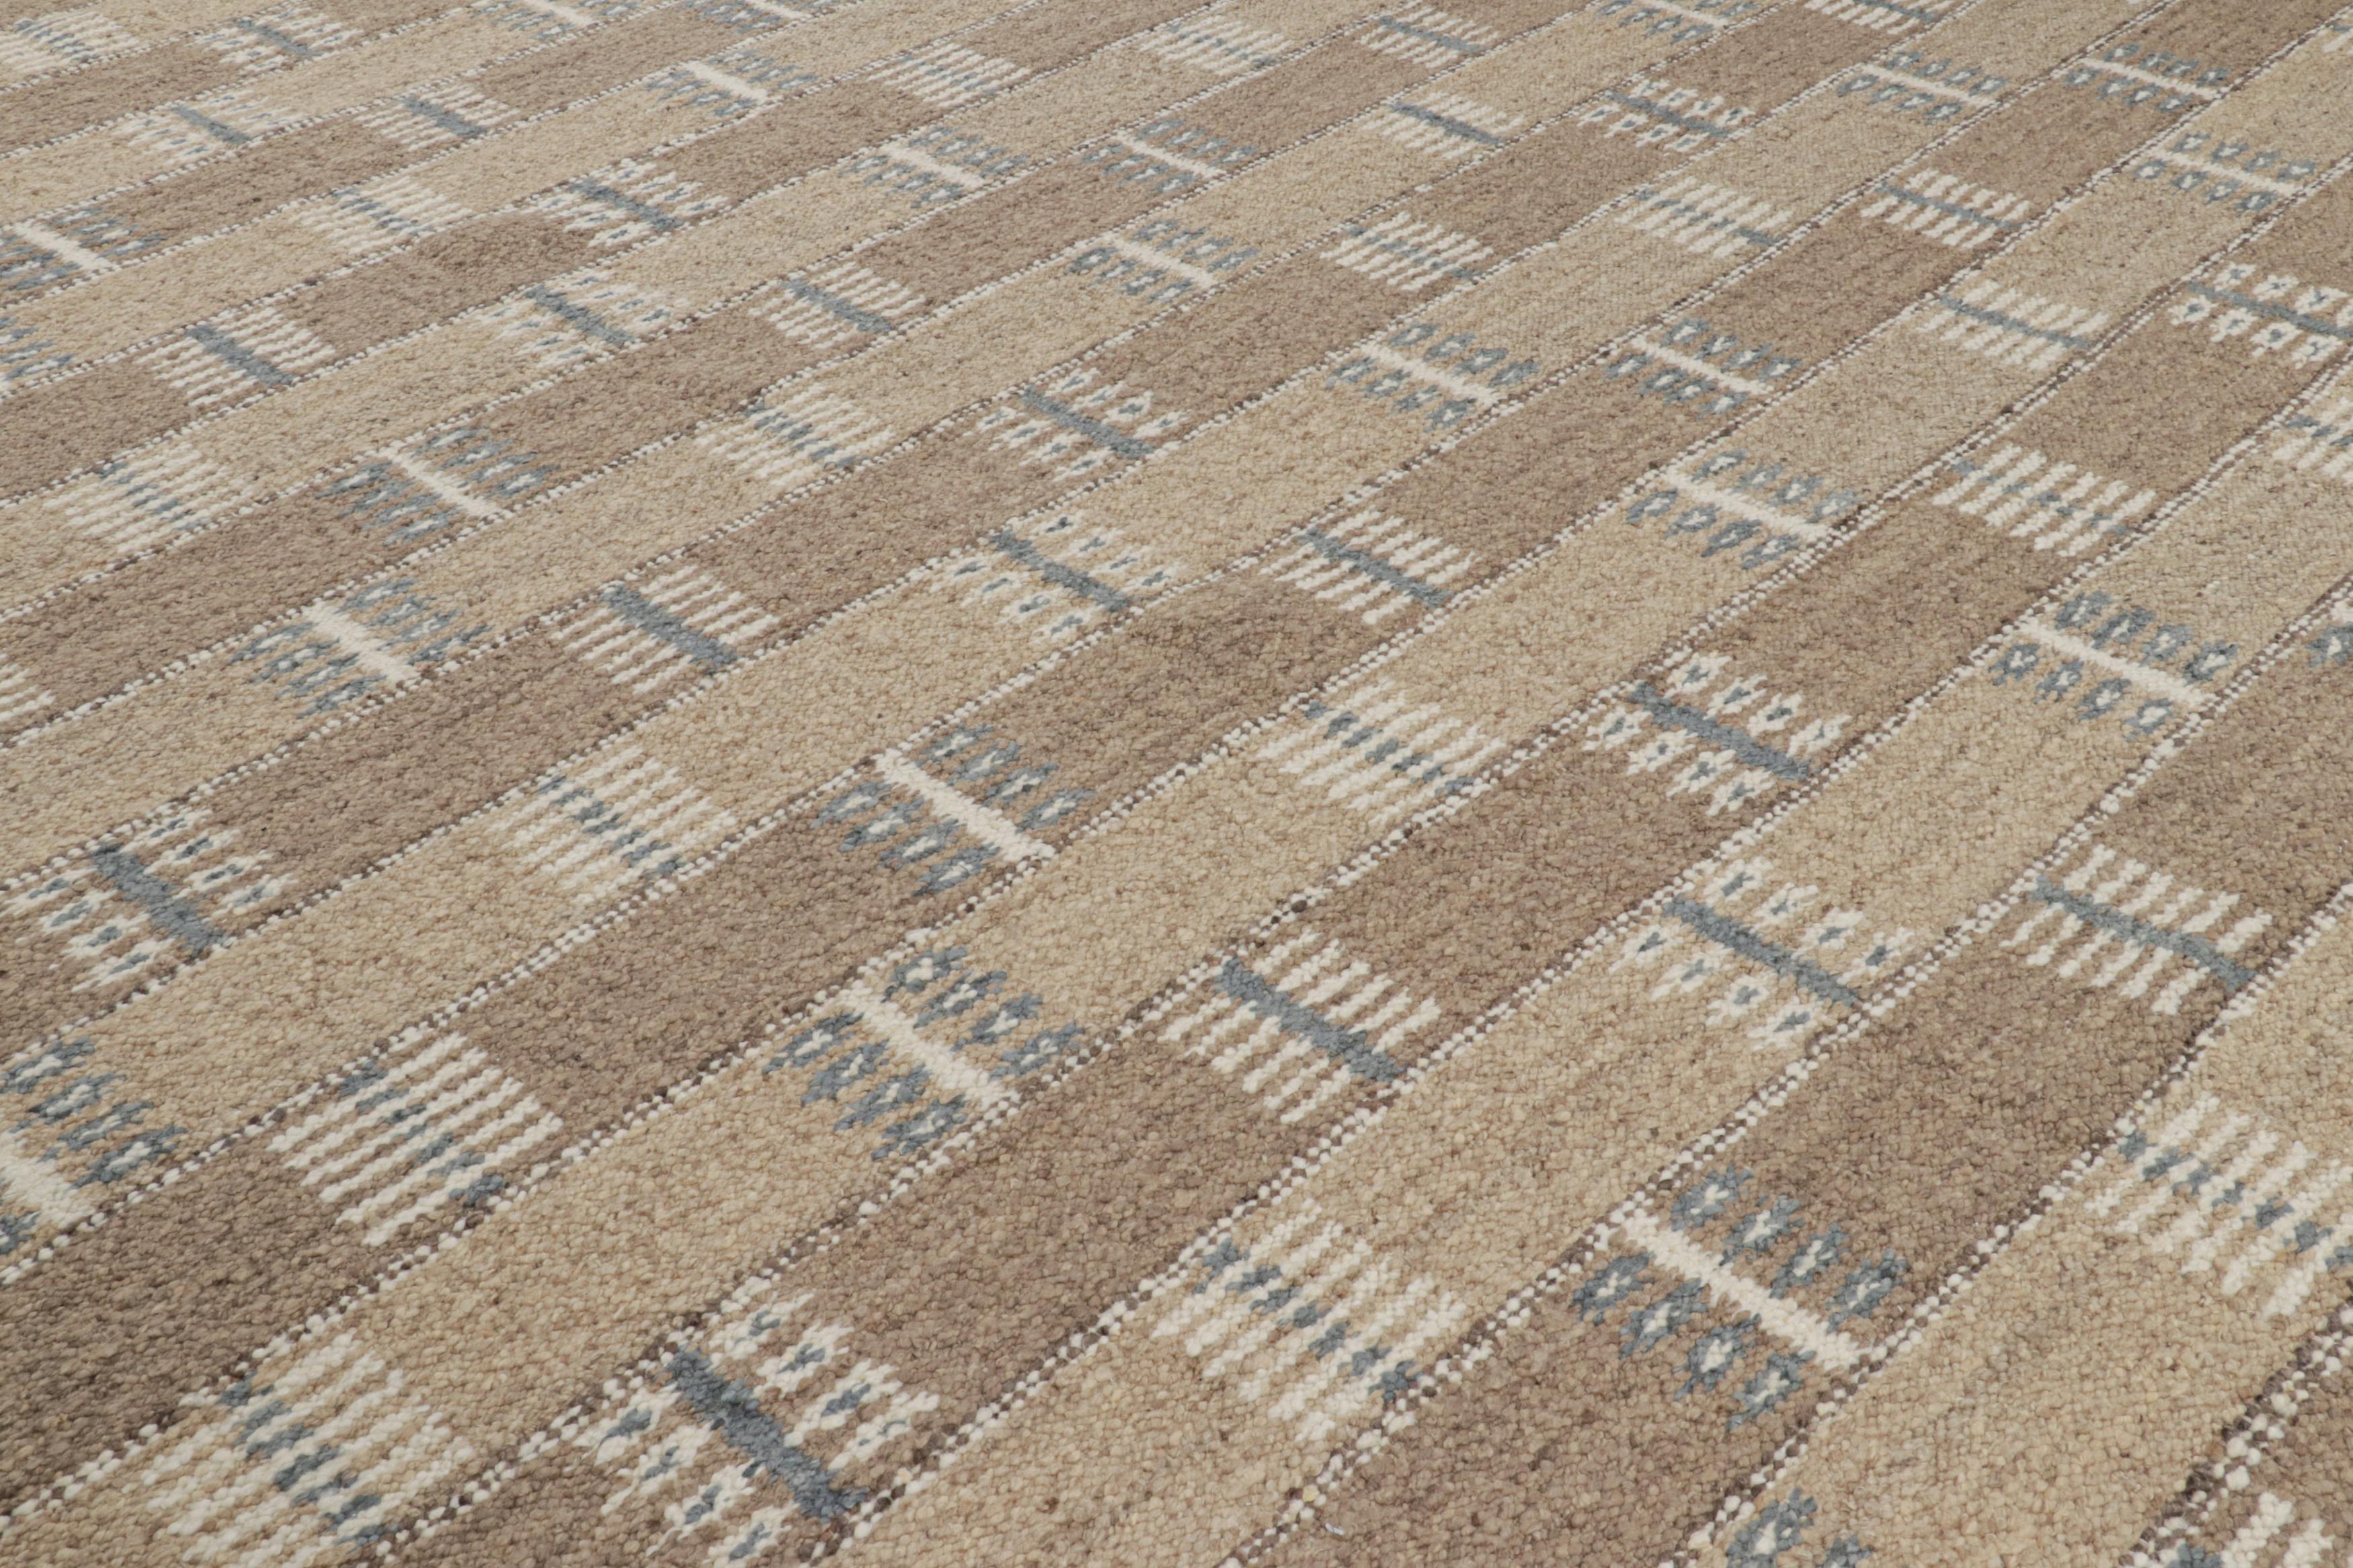 Handwoven in wool, this smart 13x18 Swedish style flat weave is Rug & Kilim’s new “Nu” texture. 

On the design: 

Our “Nu” flat weave enjoys a boucle-like texture of blended yarns, and a look both impressionistic and comfortable. Keen eyes will